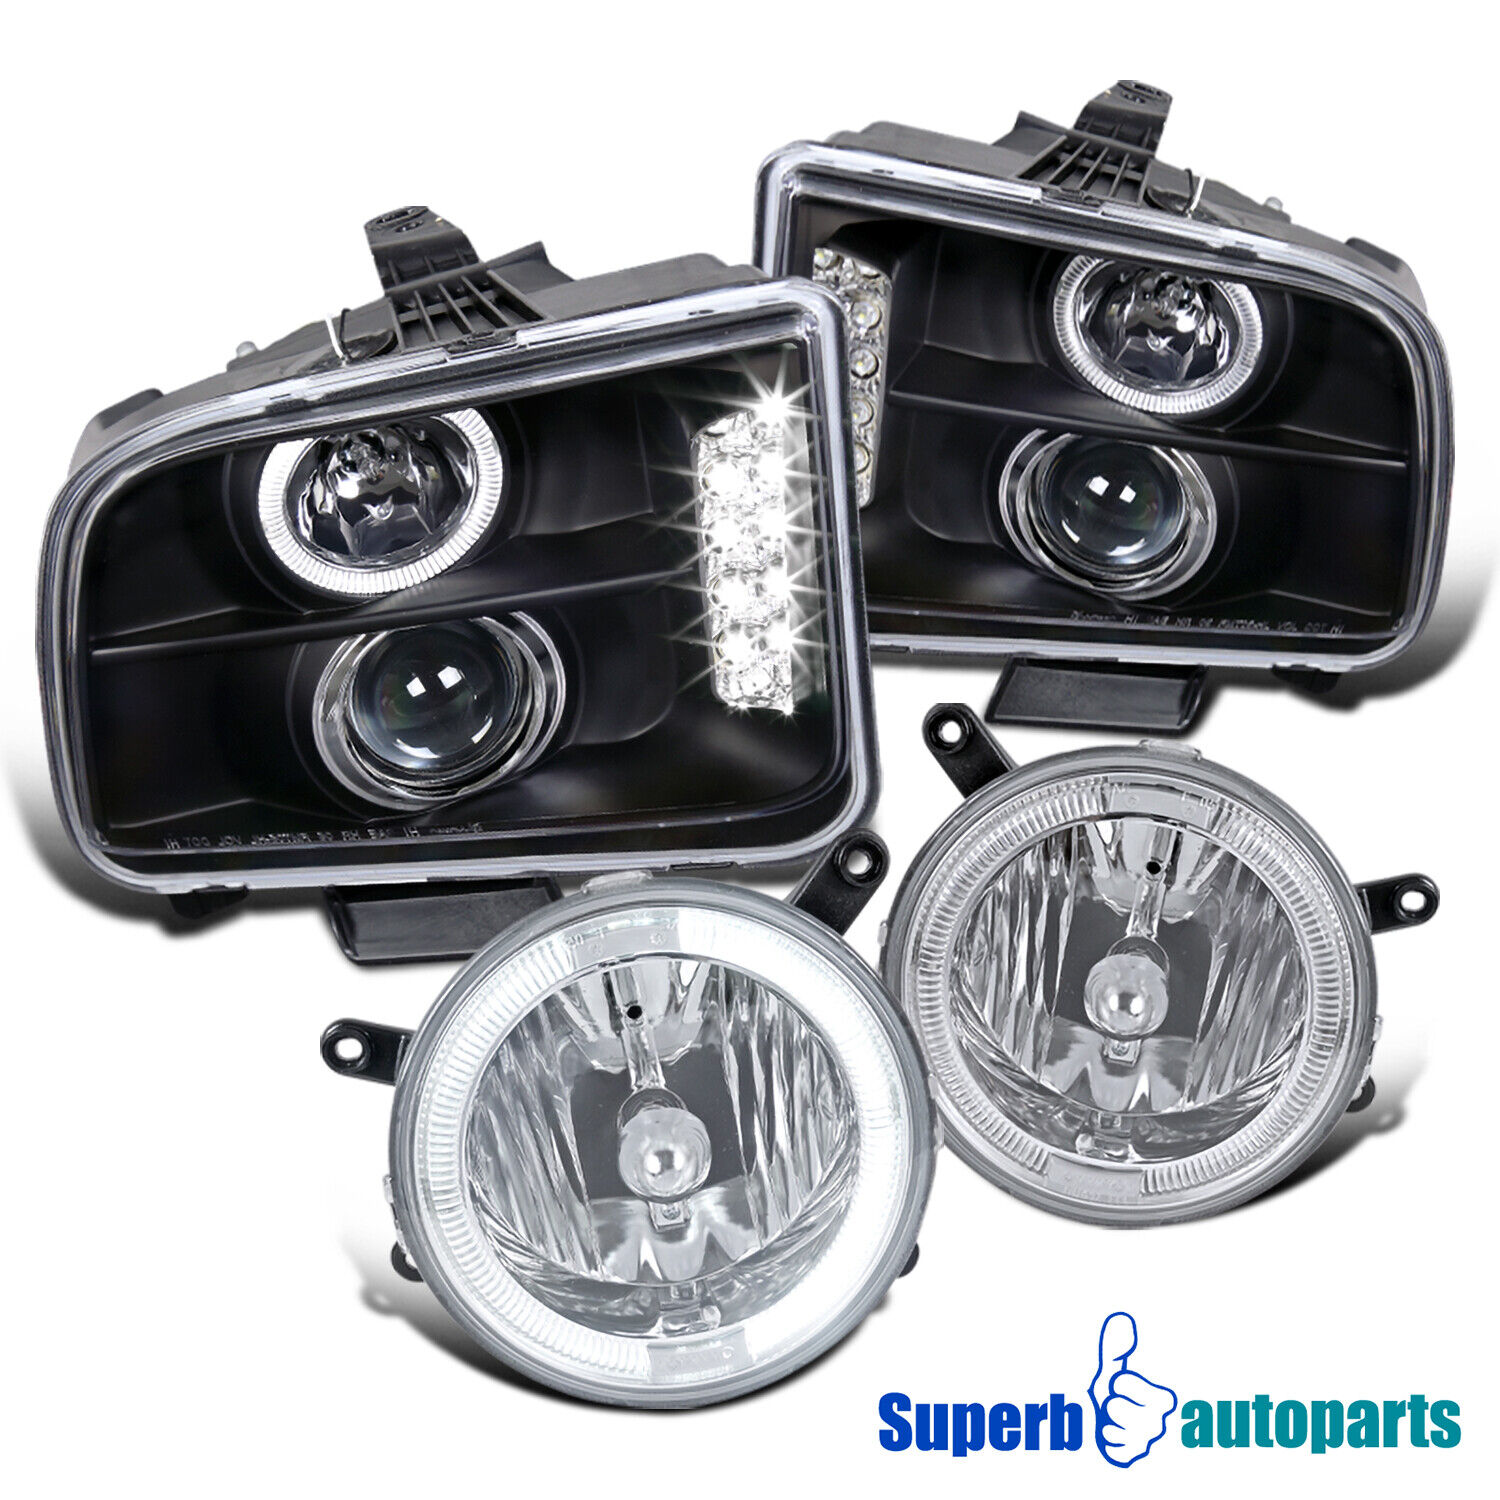 Fits 2005-2009 Ford Mustang LED Halo Projector Headlights+Fog Lamps Black